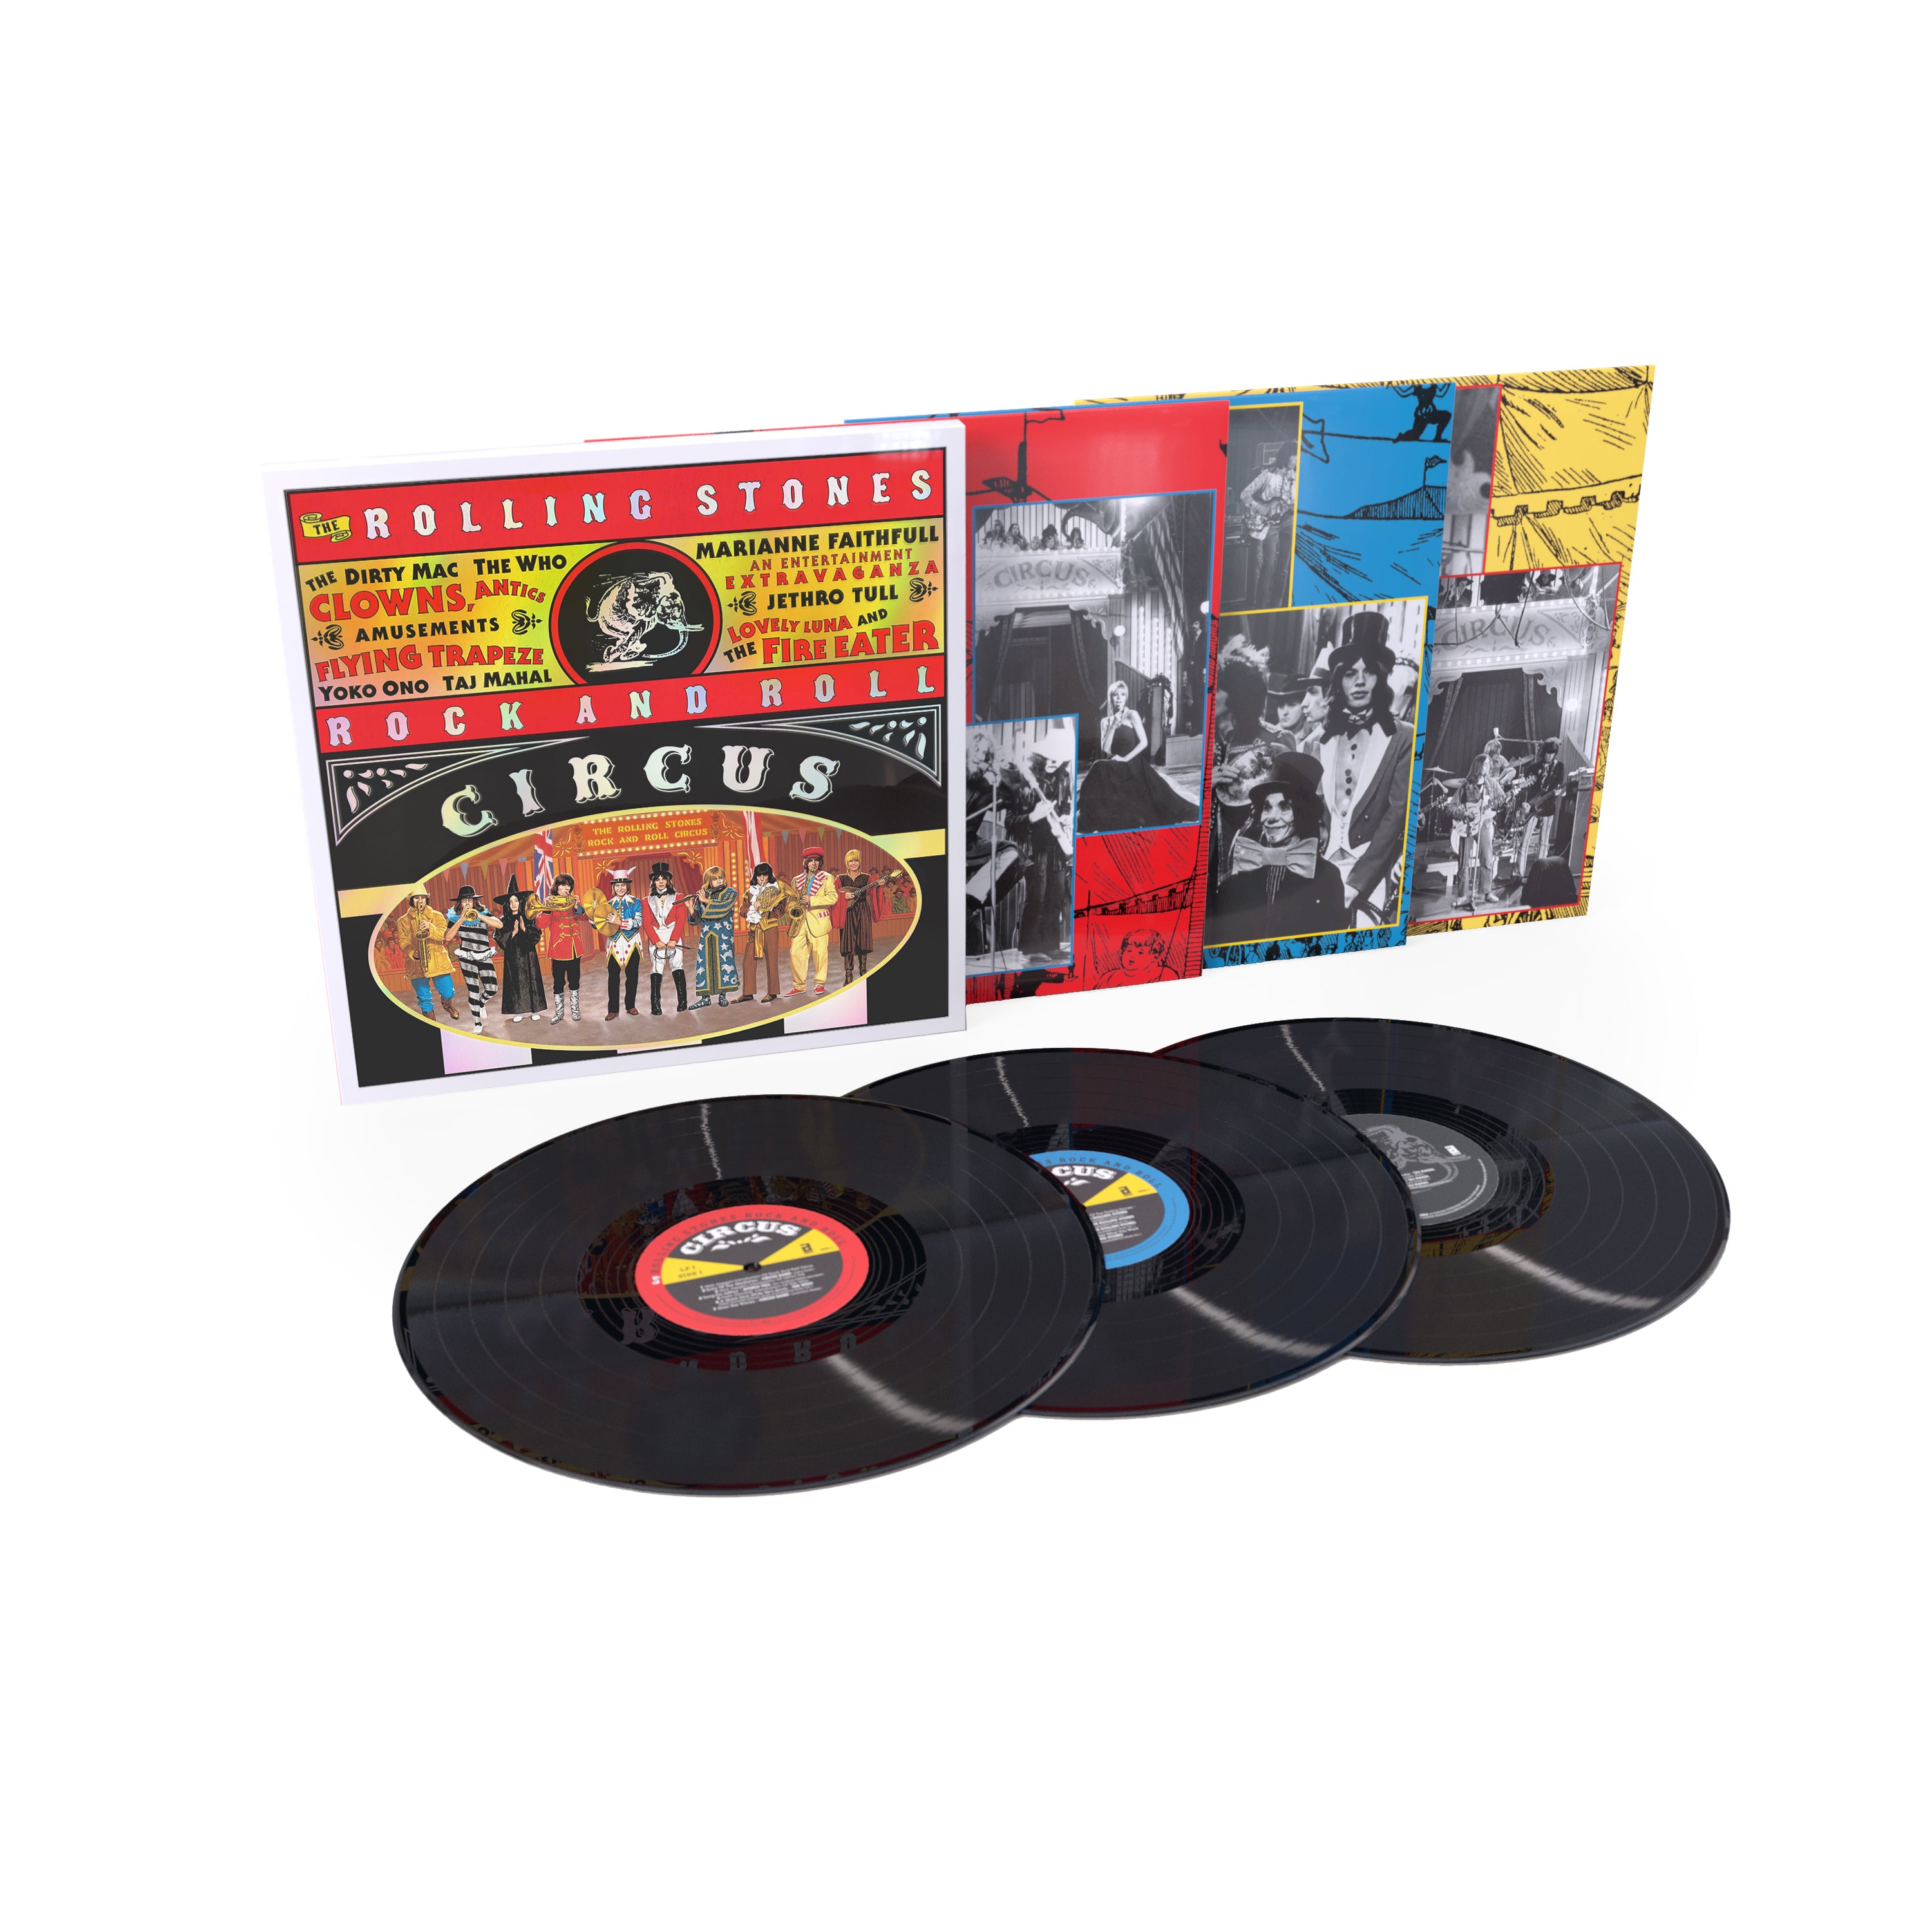 The Rolling Stones Rock and Roll Circus Vinyl – ABKCO Music and 